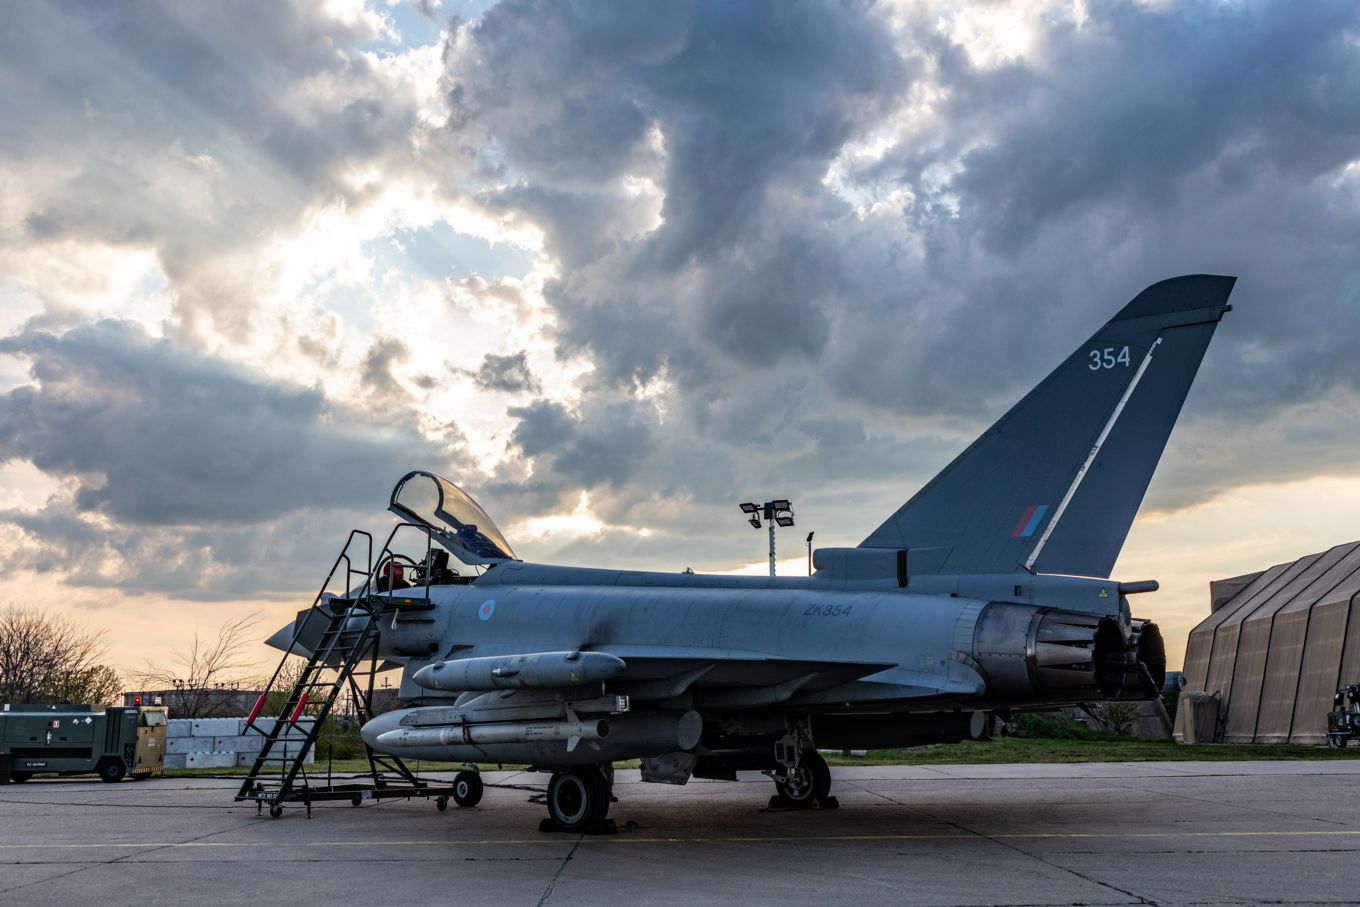 Image shows an RAF Typhoon on the ground.